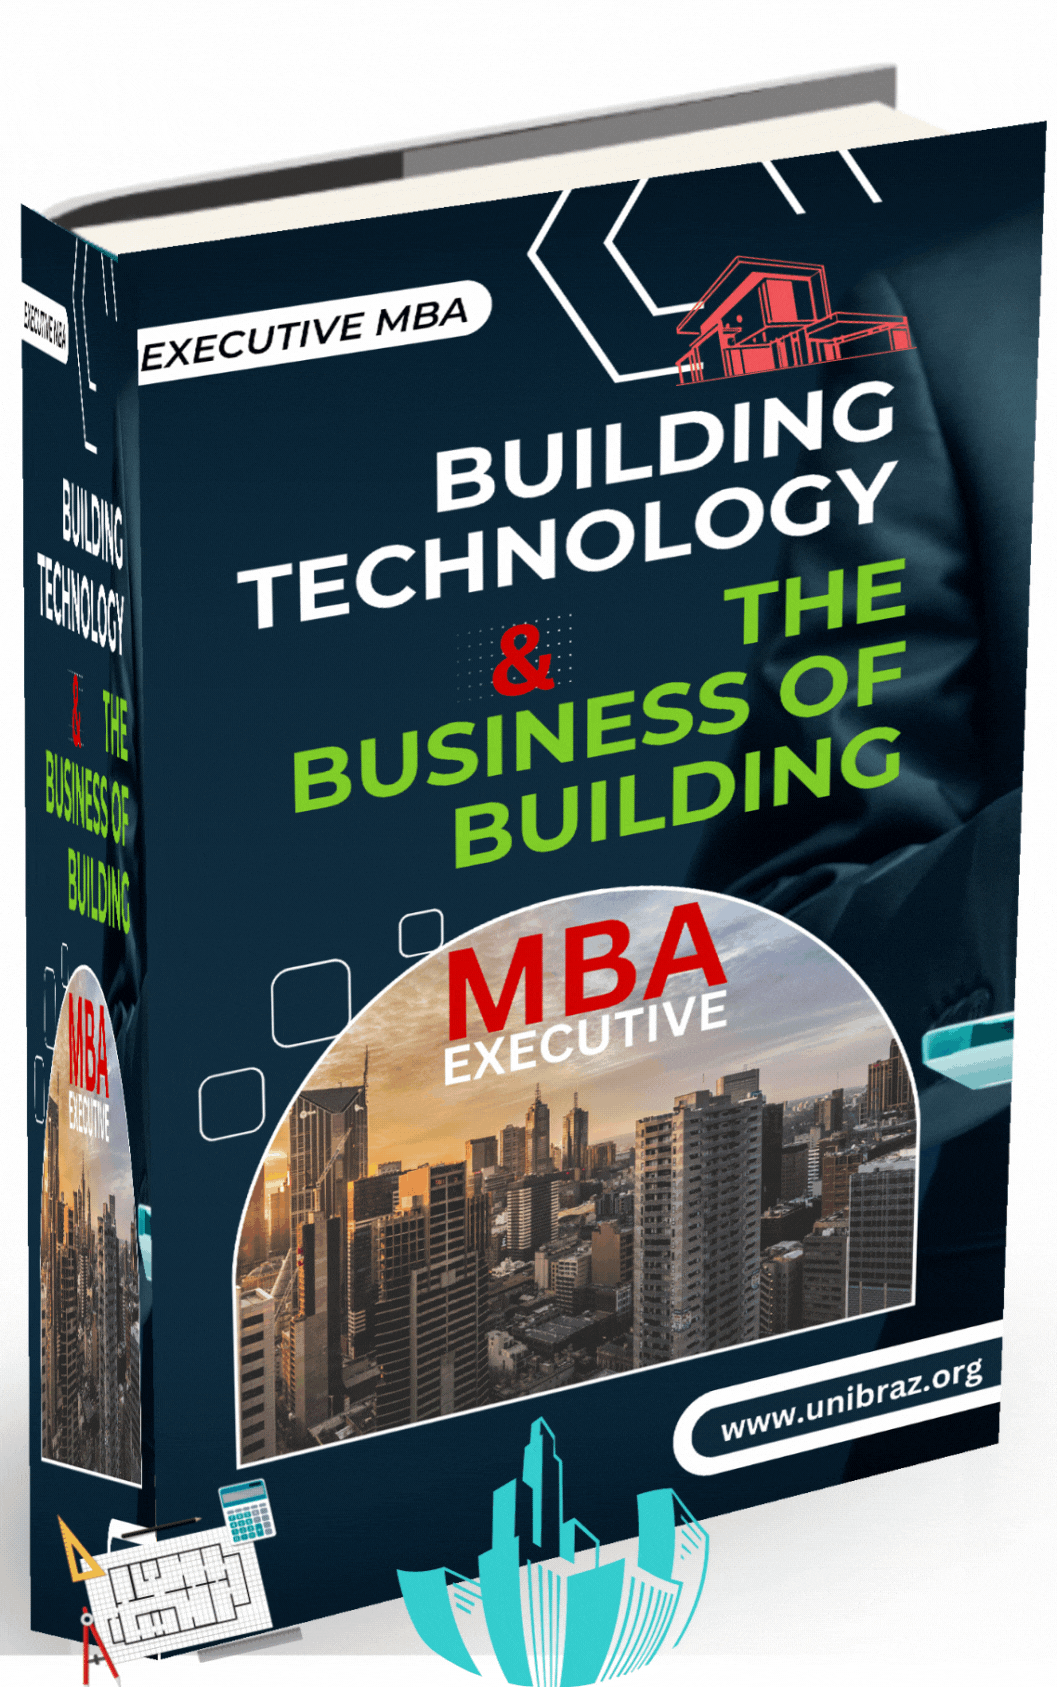 EXECUTIVE MASTERS OF BUSINESS ADMINISTRATION (MBA) – BUILDING TECHNOLOGY AND THE BUSINESS OF BUILDING CONSTRUCTION